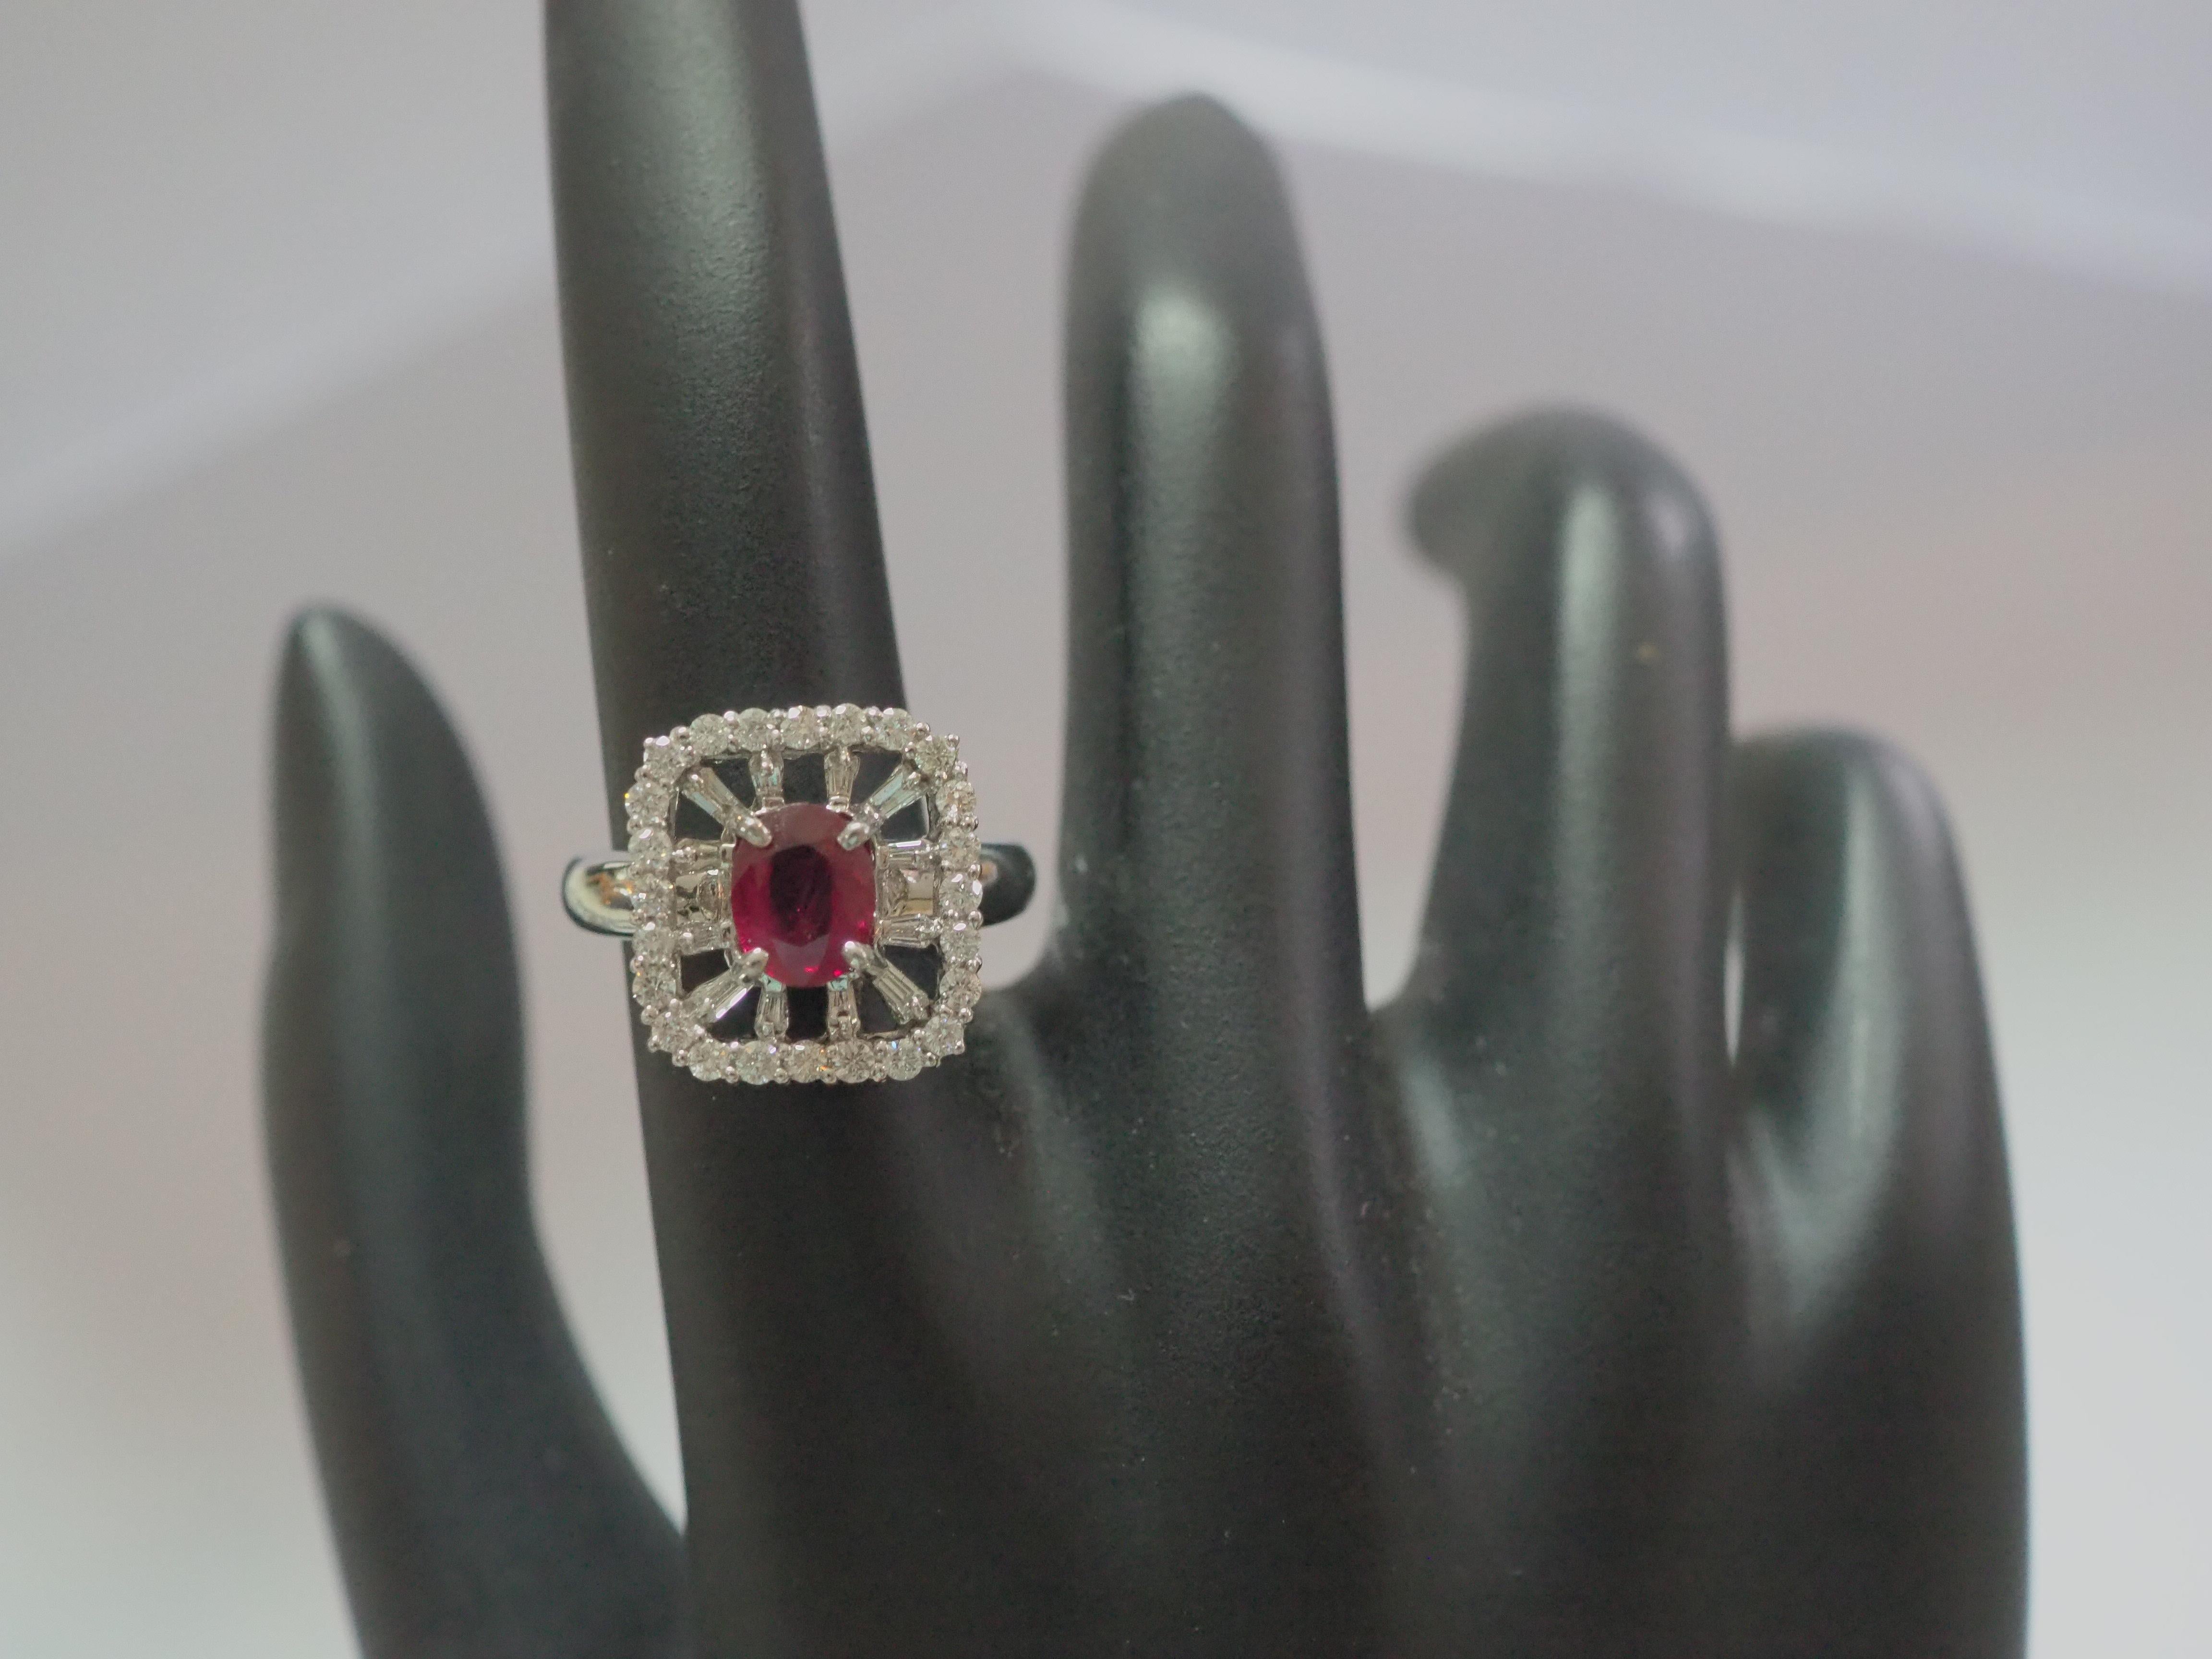 AIGS 18k White Gold 1.28ct Oval Thai Ruby & 0.7ct Diamond Cocktail Ring 5